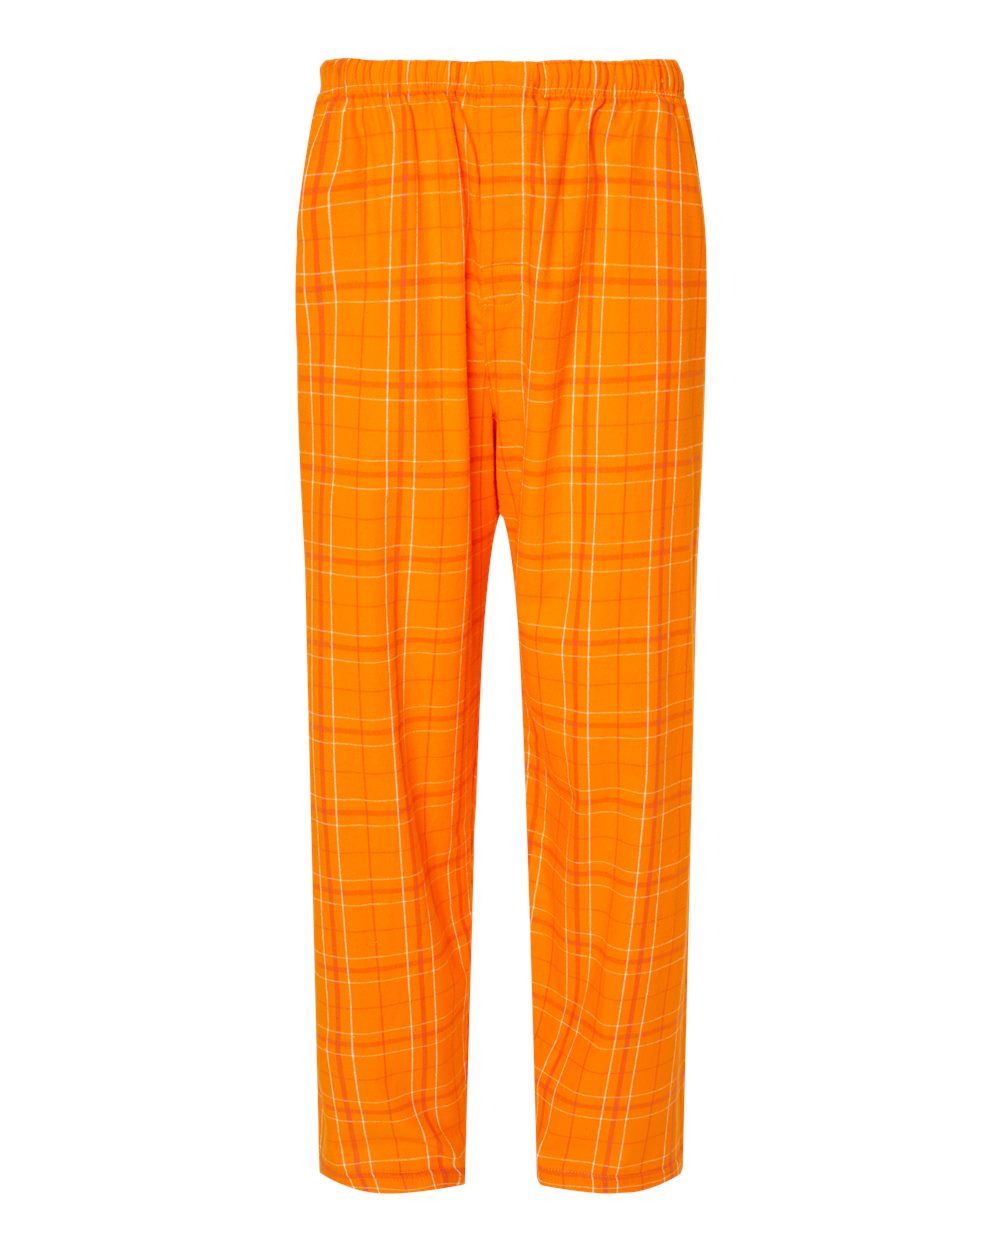 Boxercraft Unisex Flannel Pants Orange Field Day Flannel Pants with Custom Text